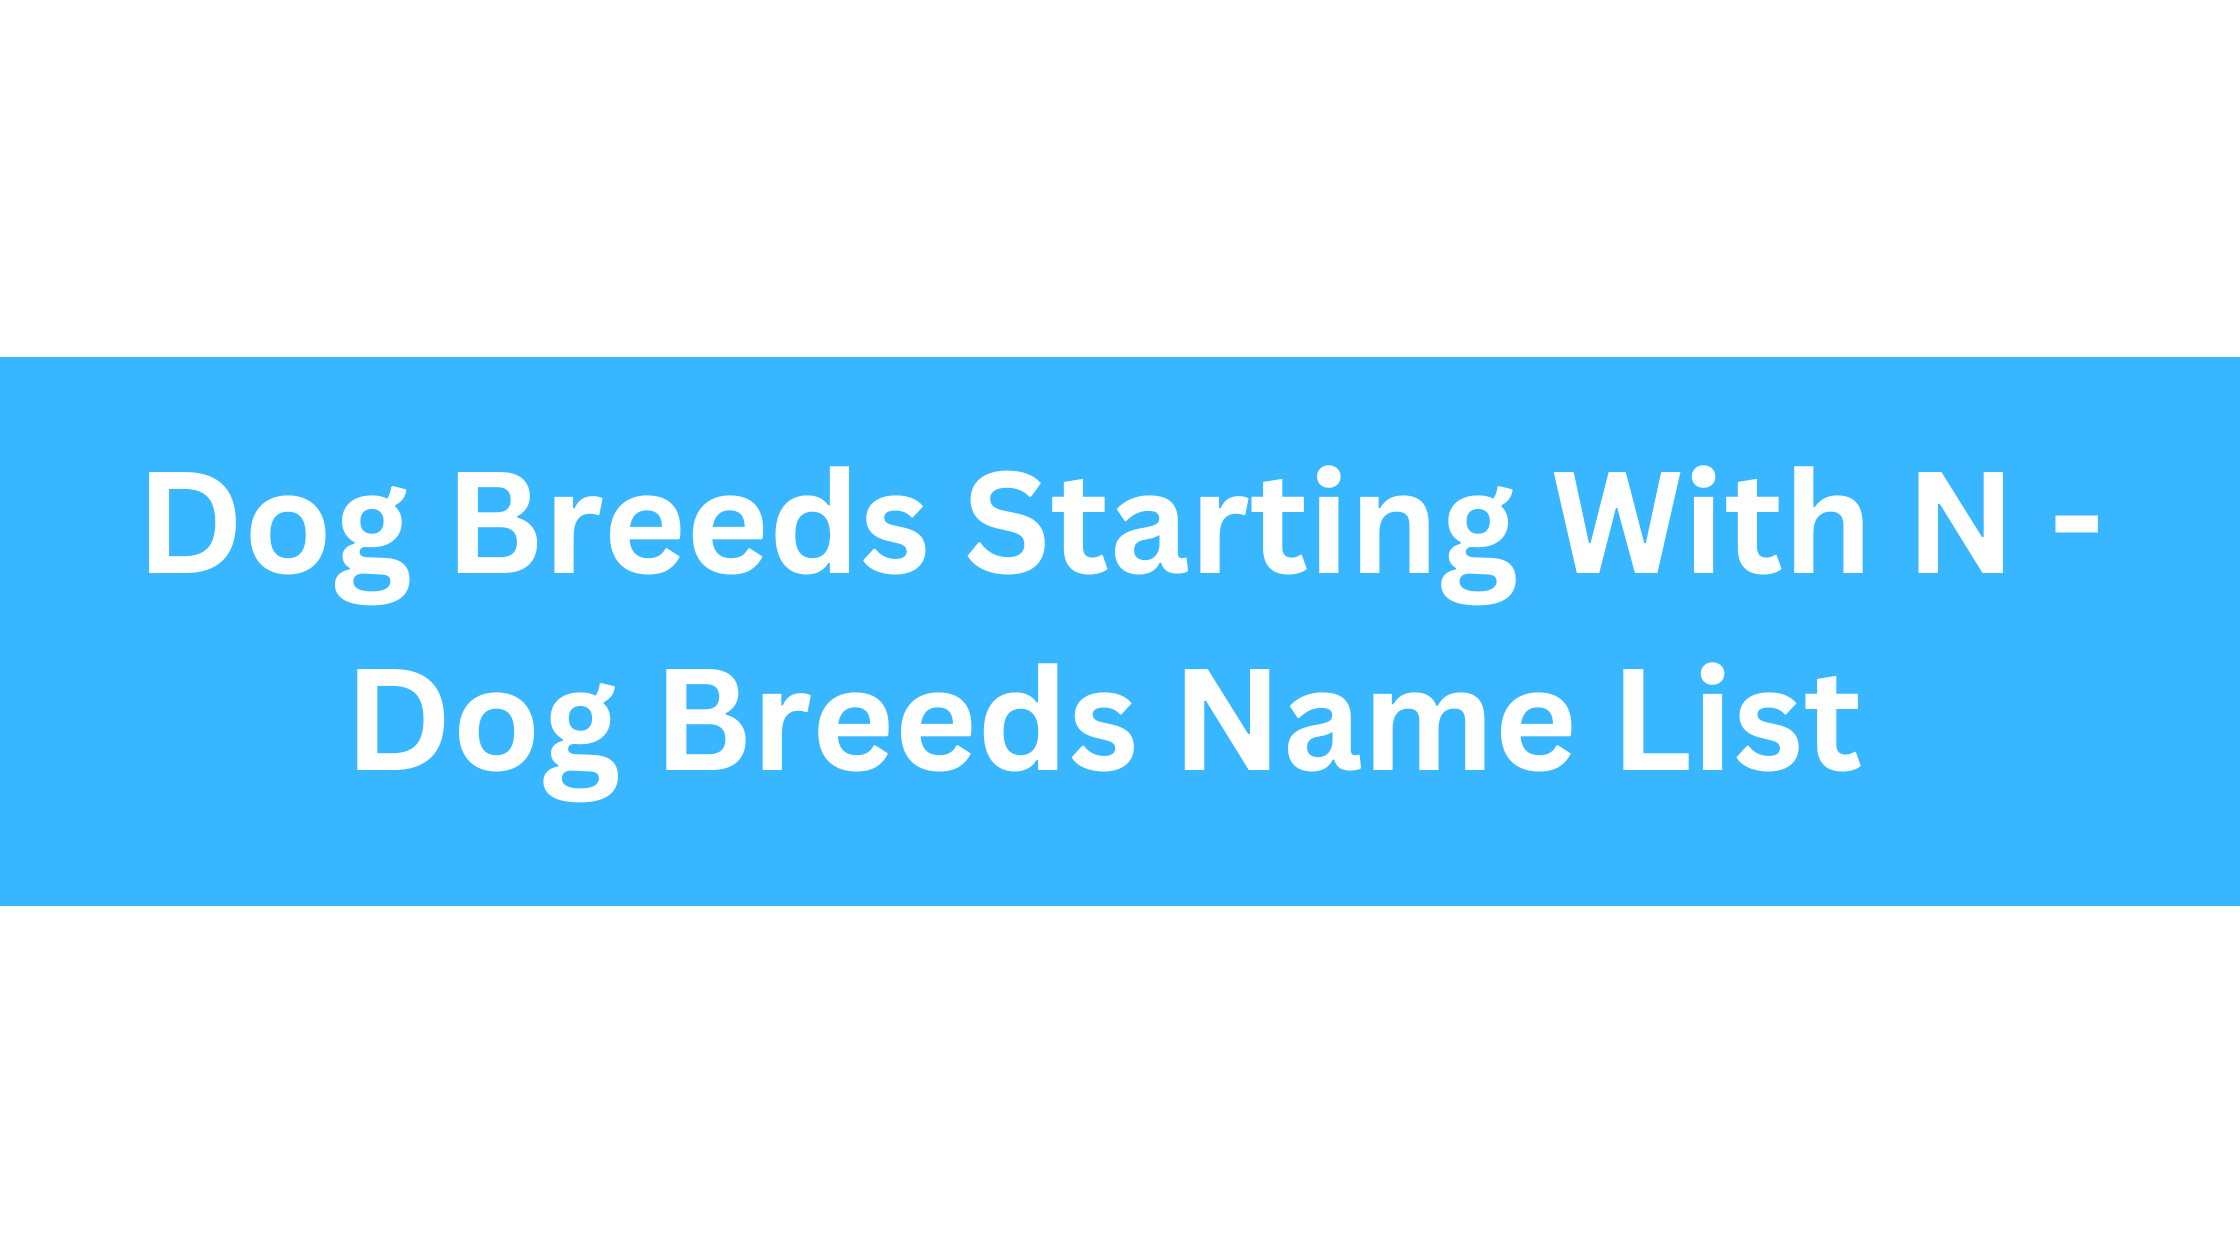 Dog Breeds Starting With N